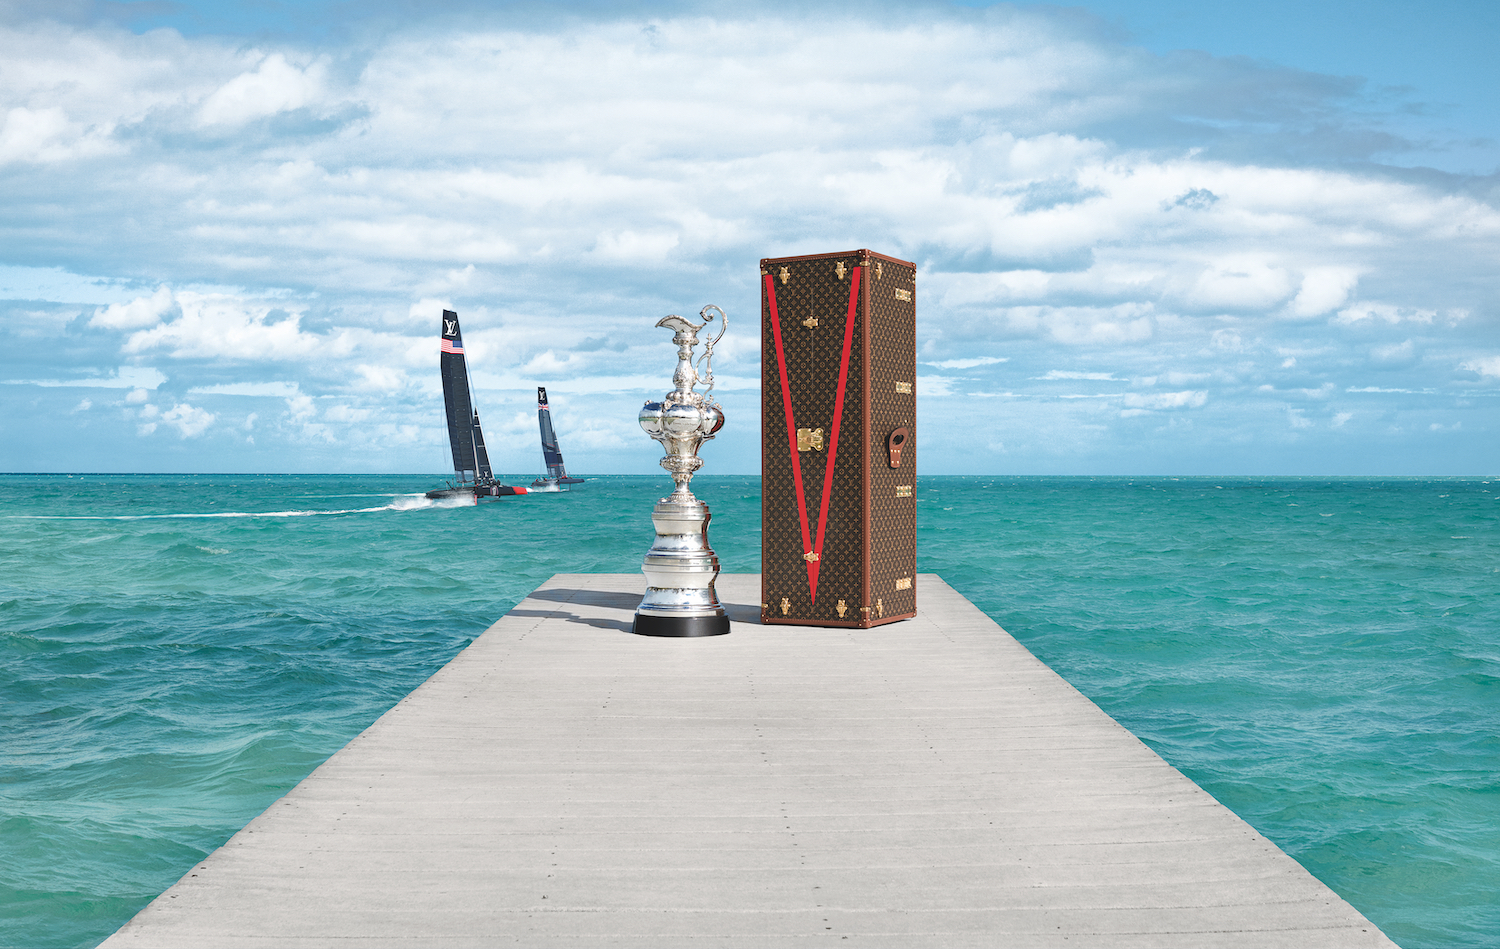 Louis Vuitton Cup and the Louis Vuitton 37th America’s Cup Barcelona_Trophy Trunk